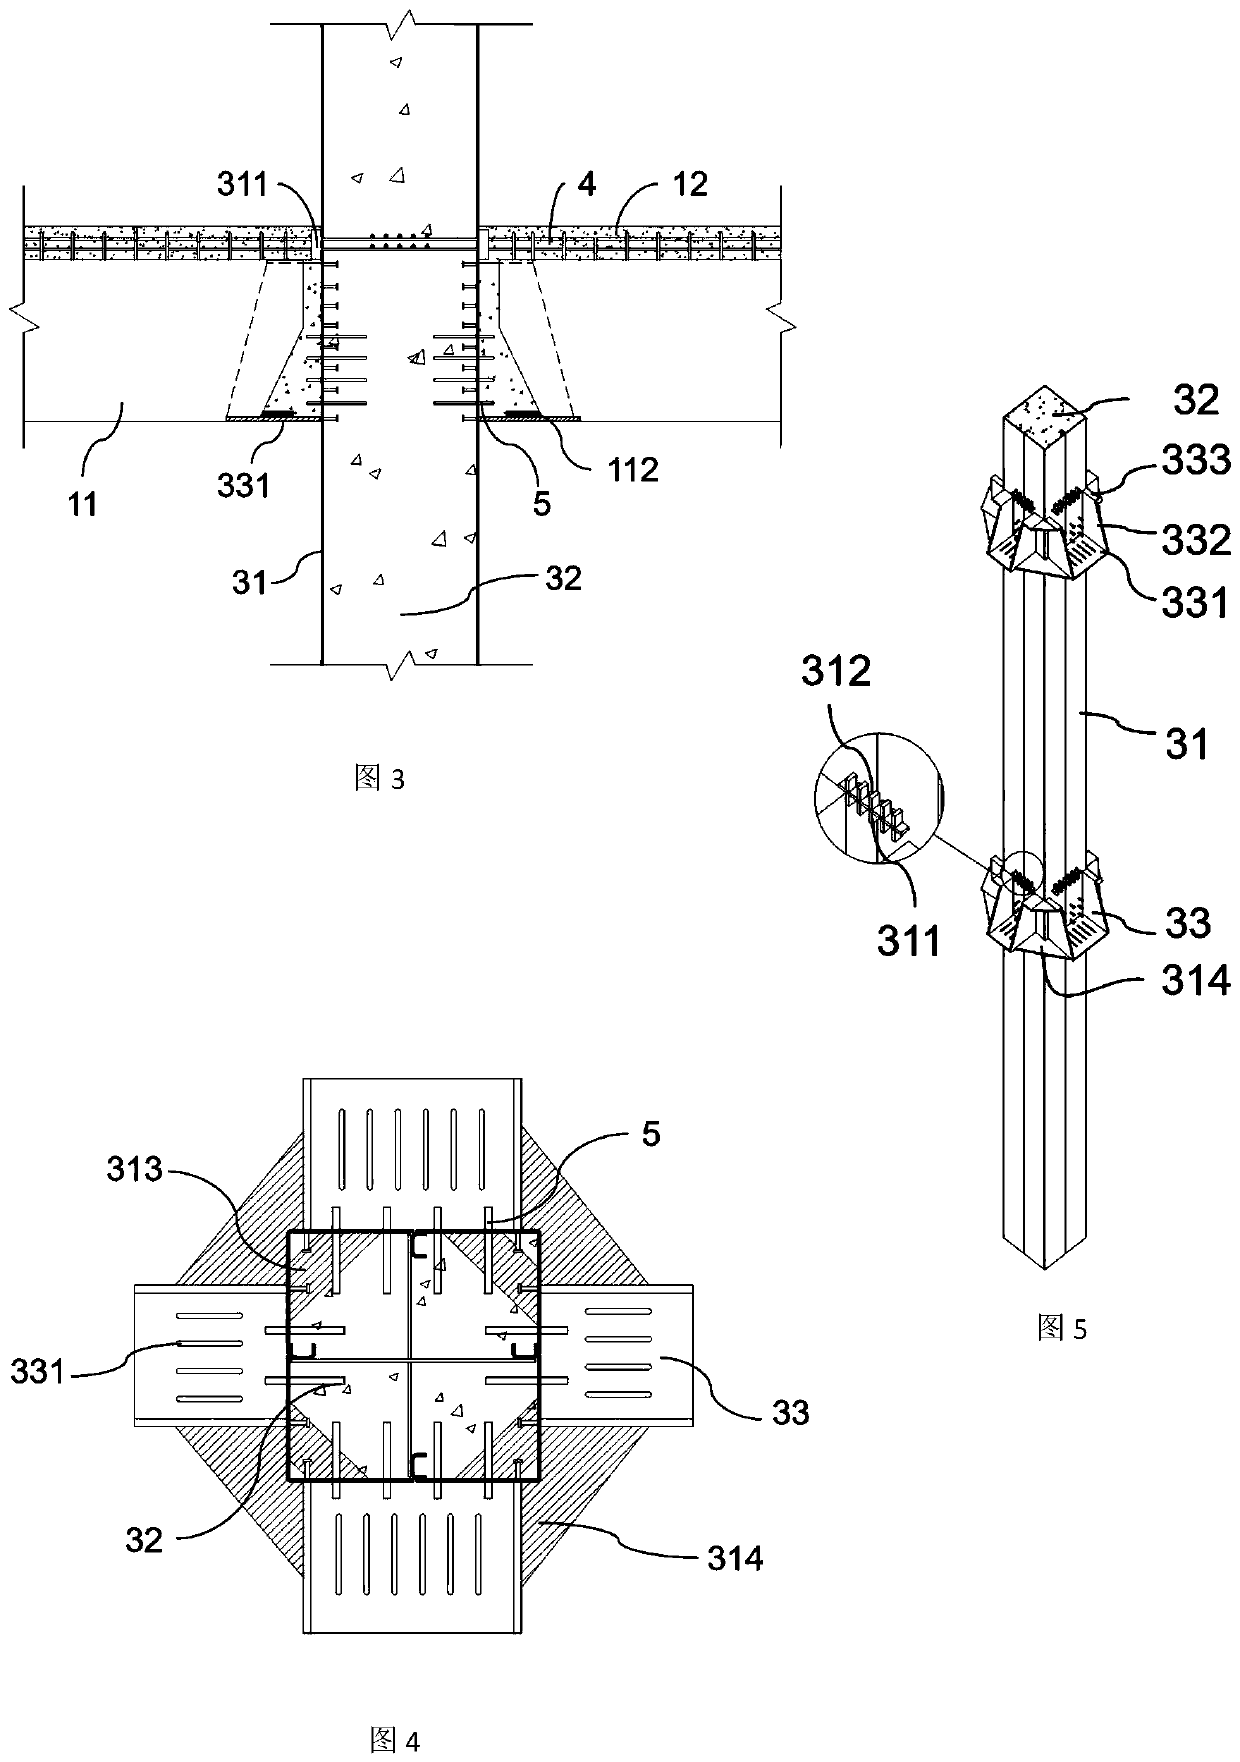 Combination frame structure system with rigid-connection joints